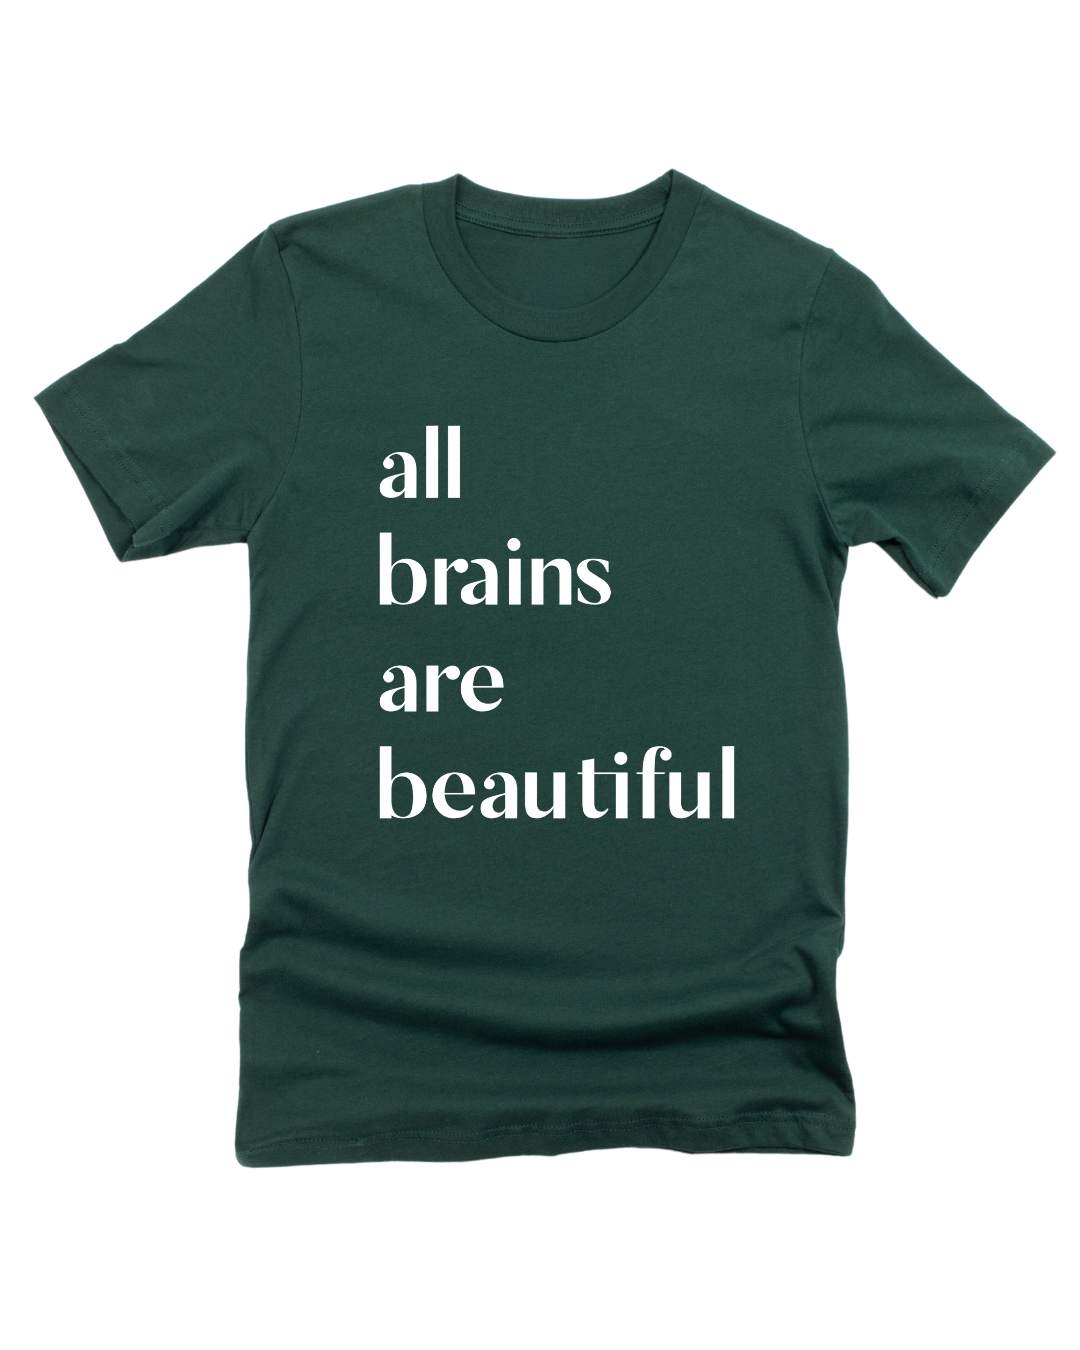 All Brains are Beautiful Children’s Tee